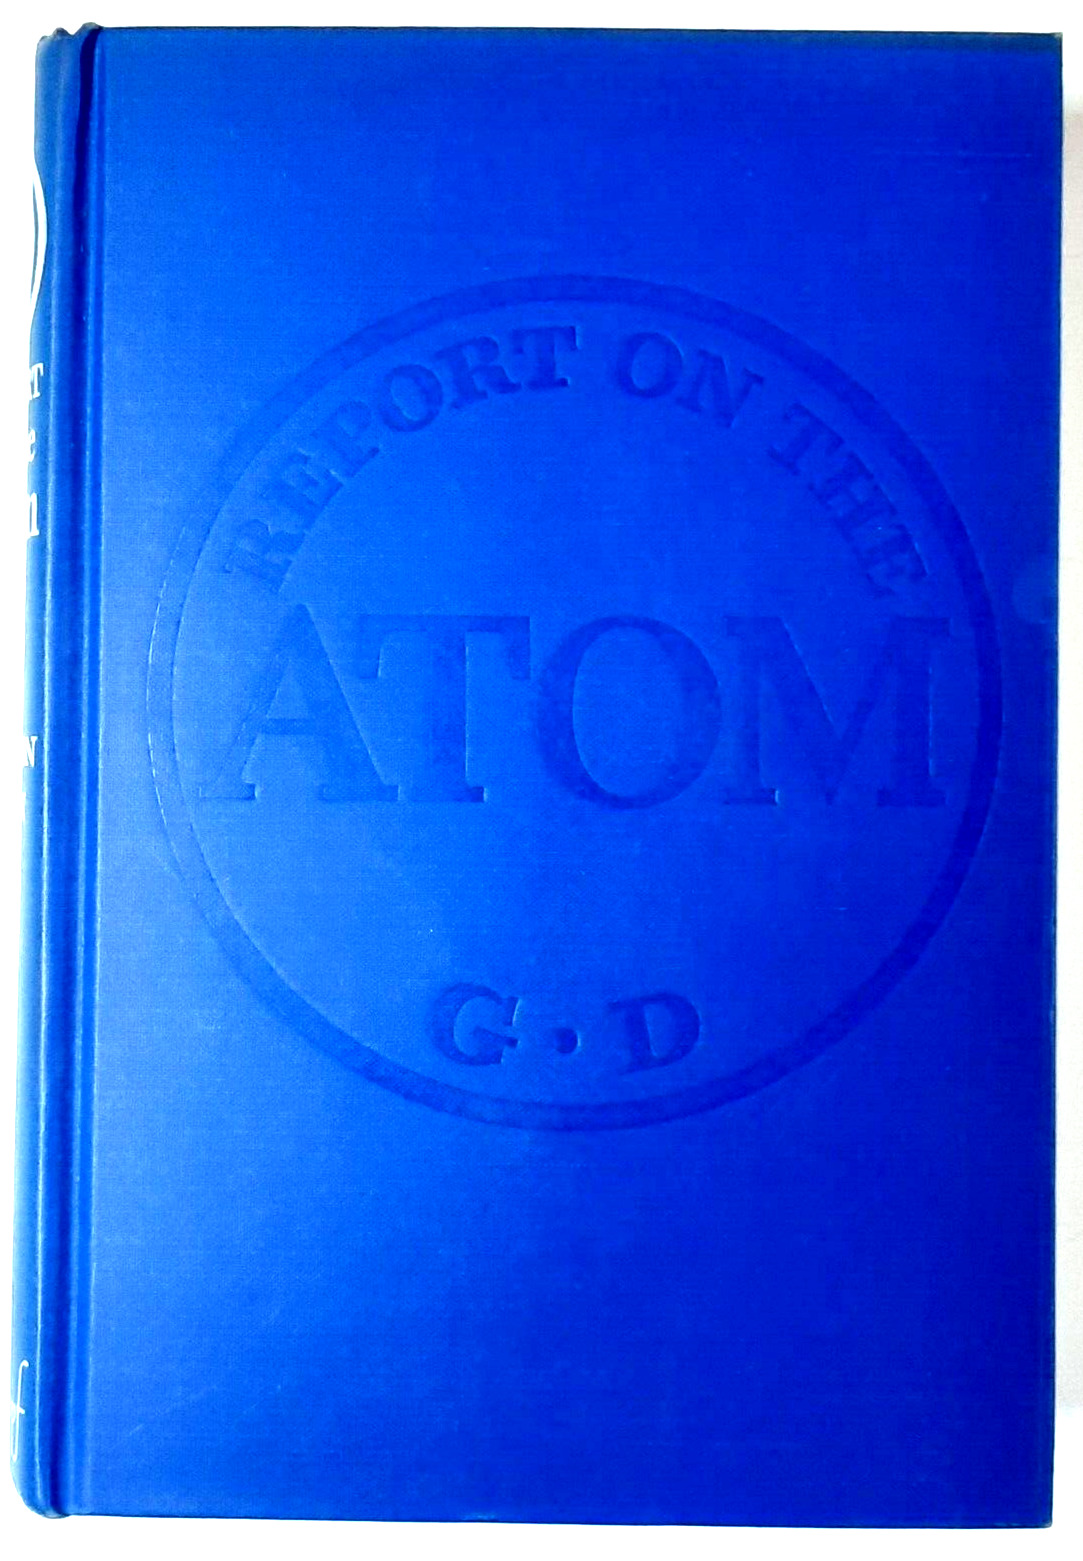 1953 HB book REPORT ON THE ATOM by Gordon Dean  First Edition